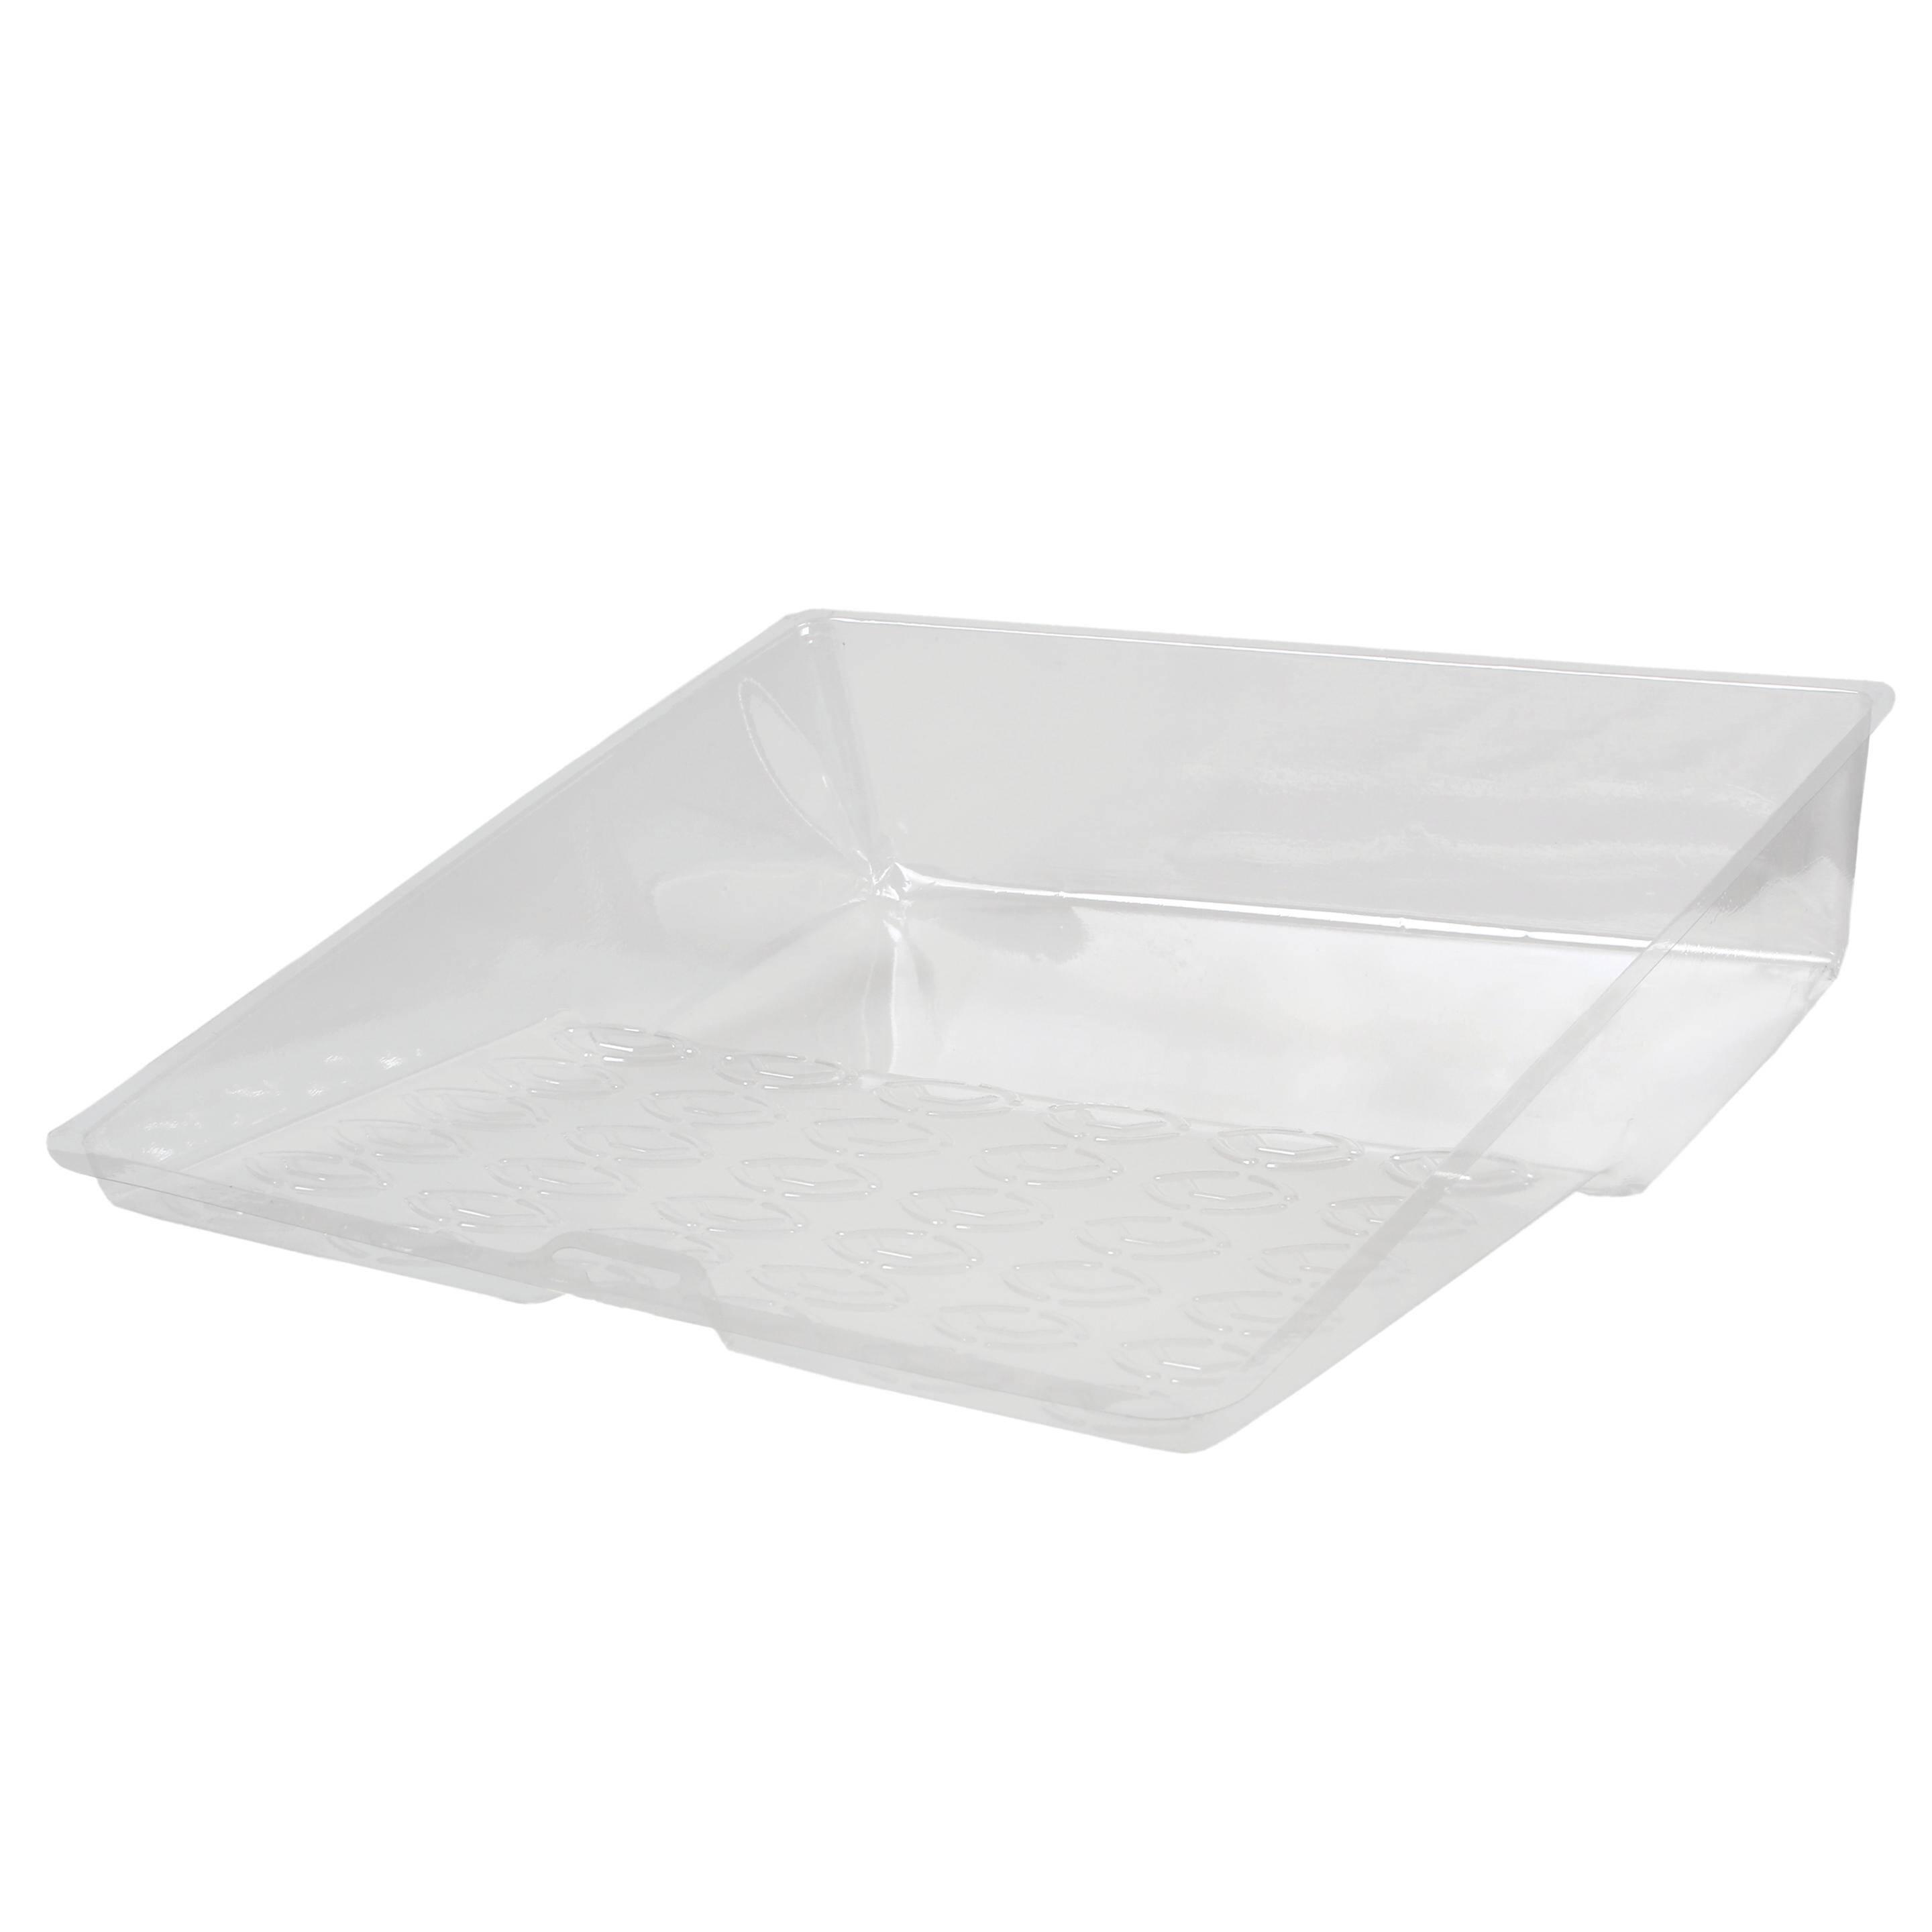 Paint tray liner 25/31cm